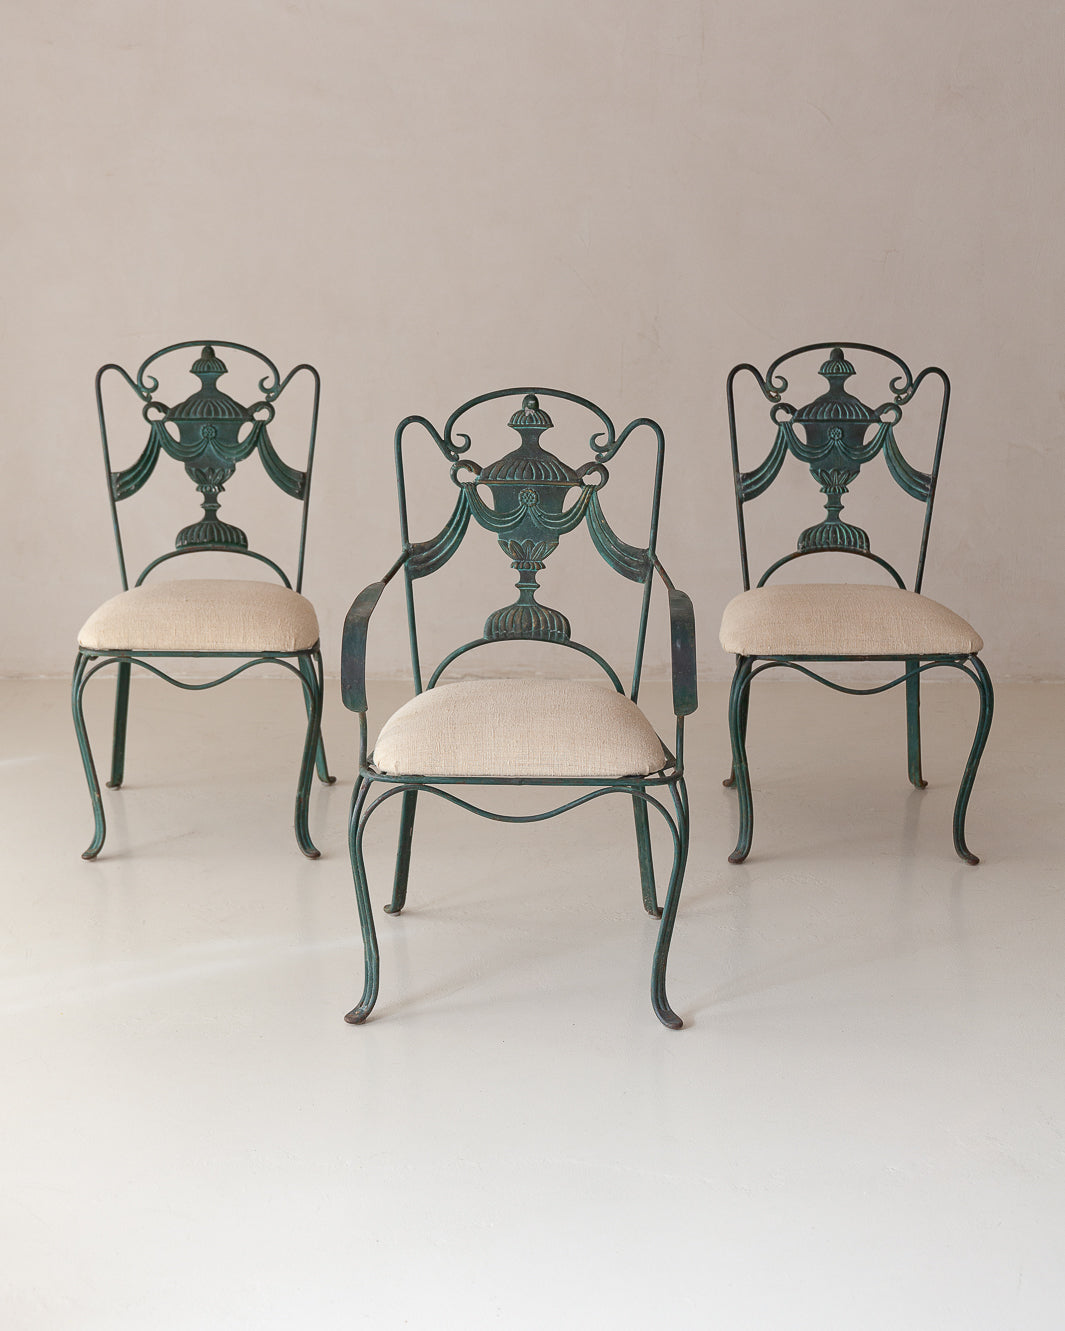 Set of 3 Roma chairs from the 40s